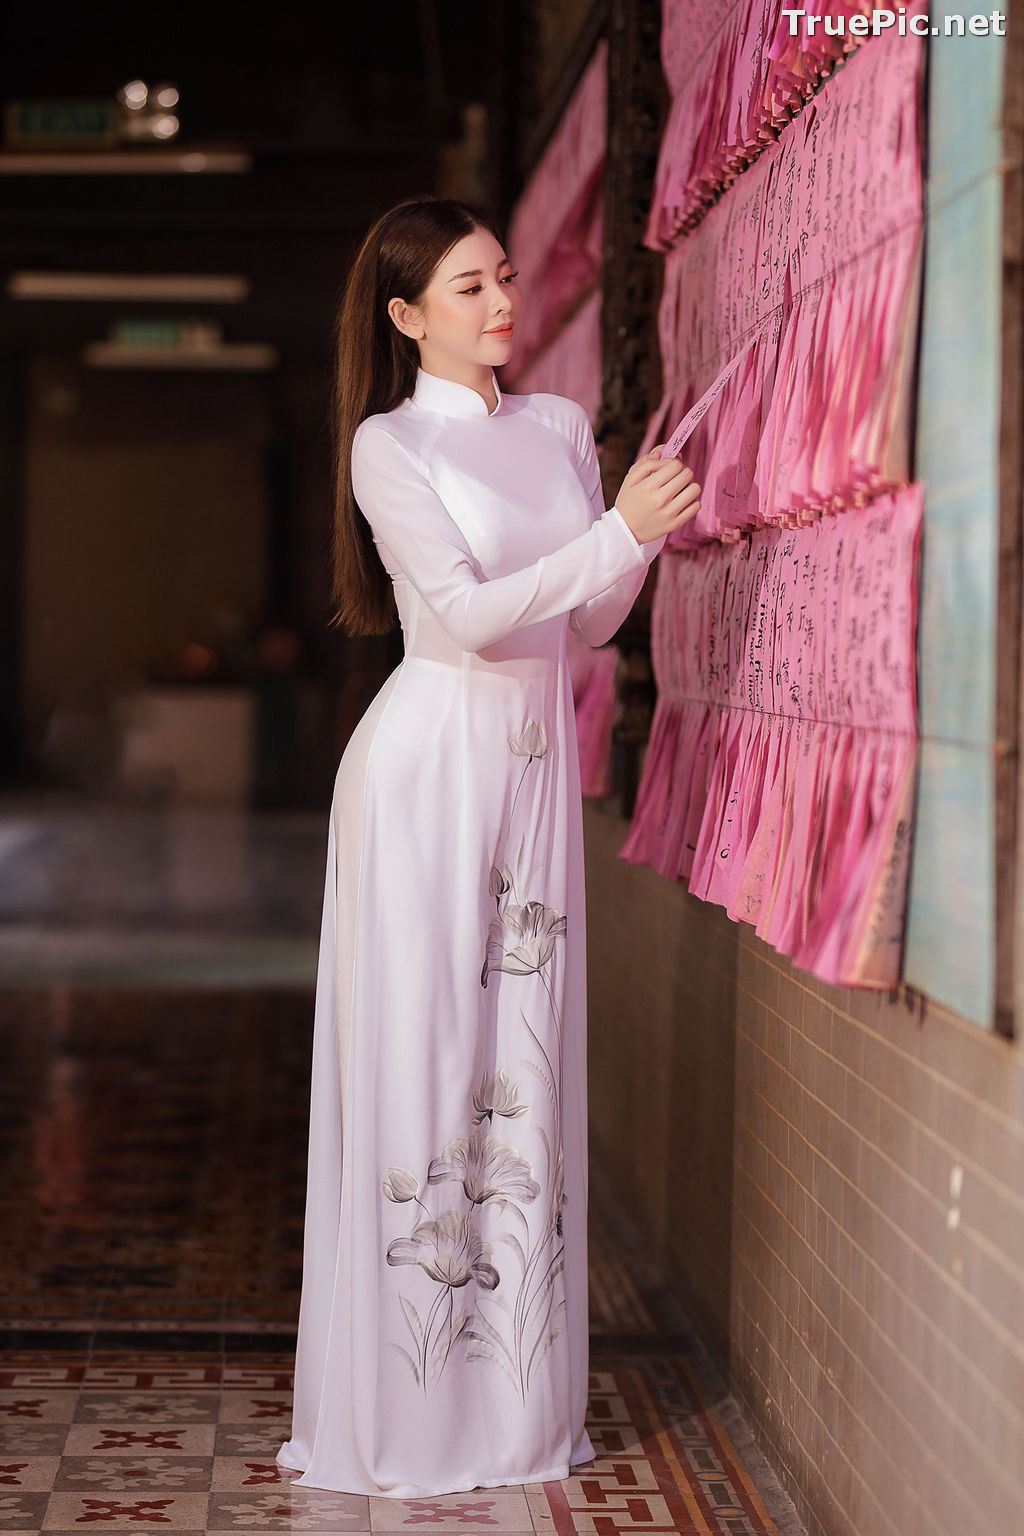 Image The Beauty of Vietnamese Girls with Traditional Dress (Ao Dai) #2 - TruePic.net - Picture-60